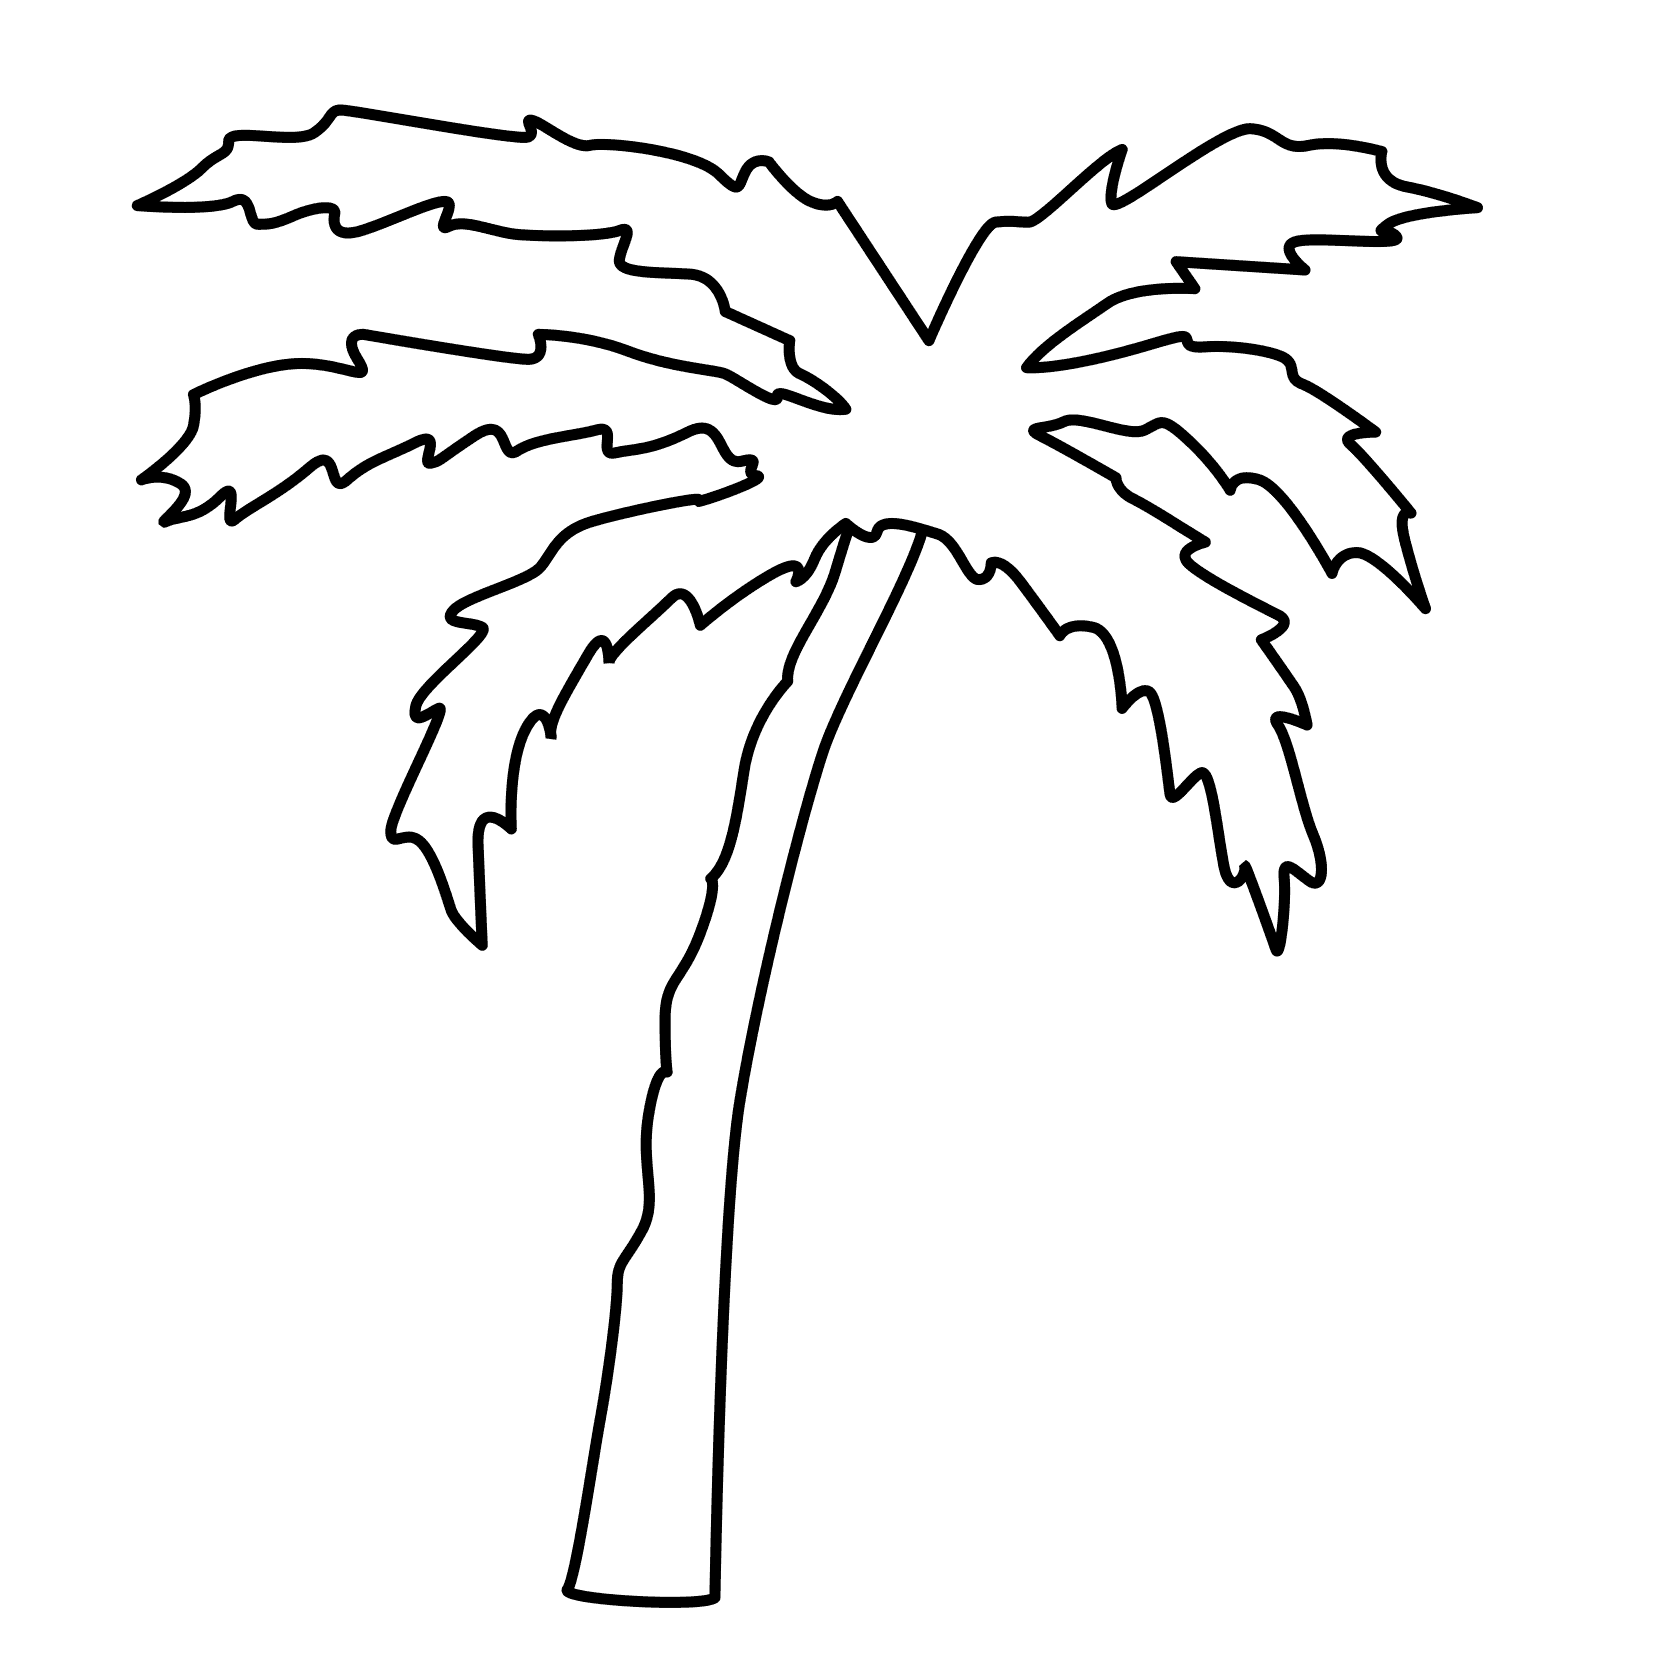 Coloring Page Palm Tree | Coloring Pages for Kids and for Adults